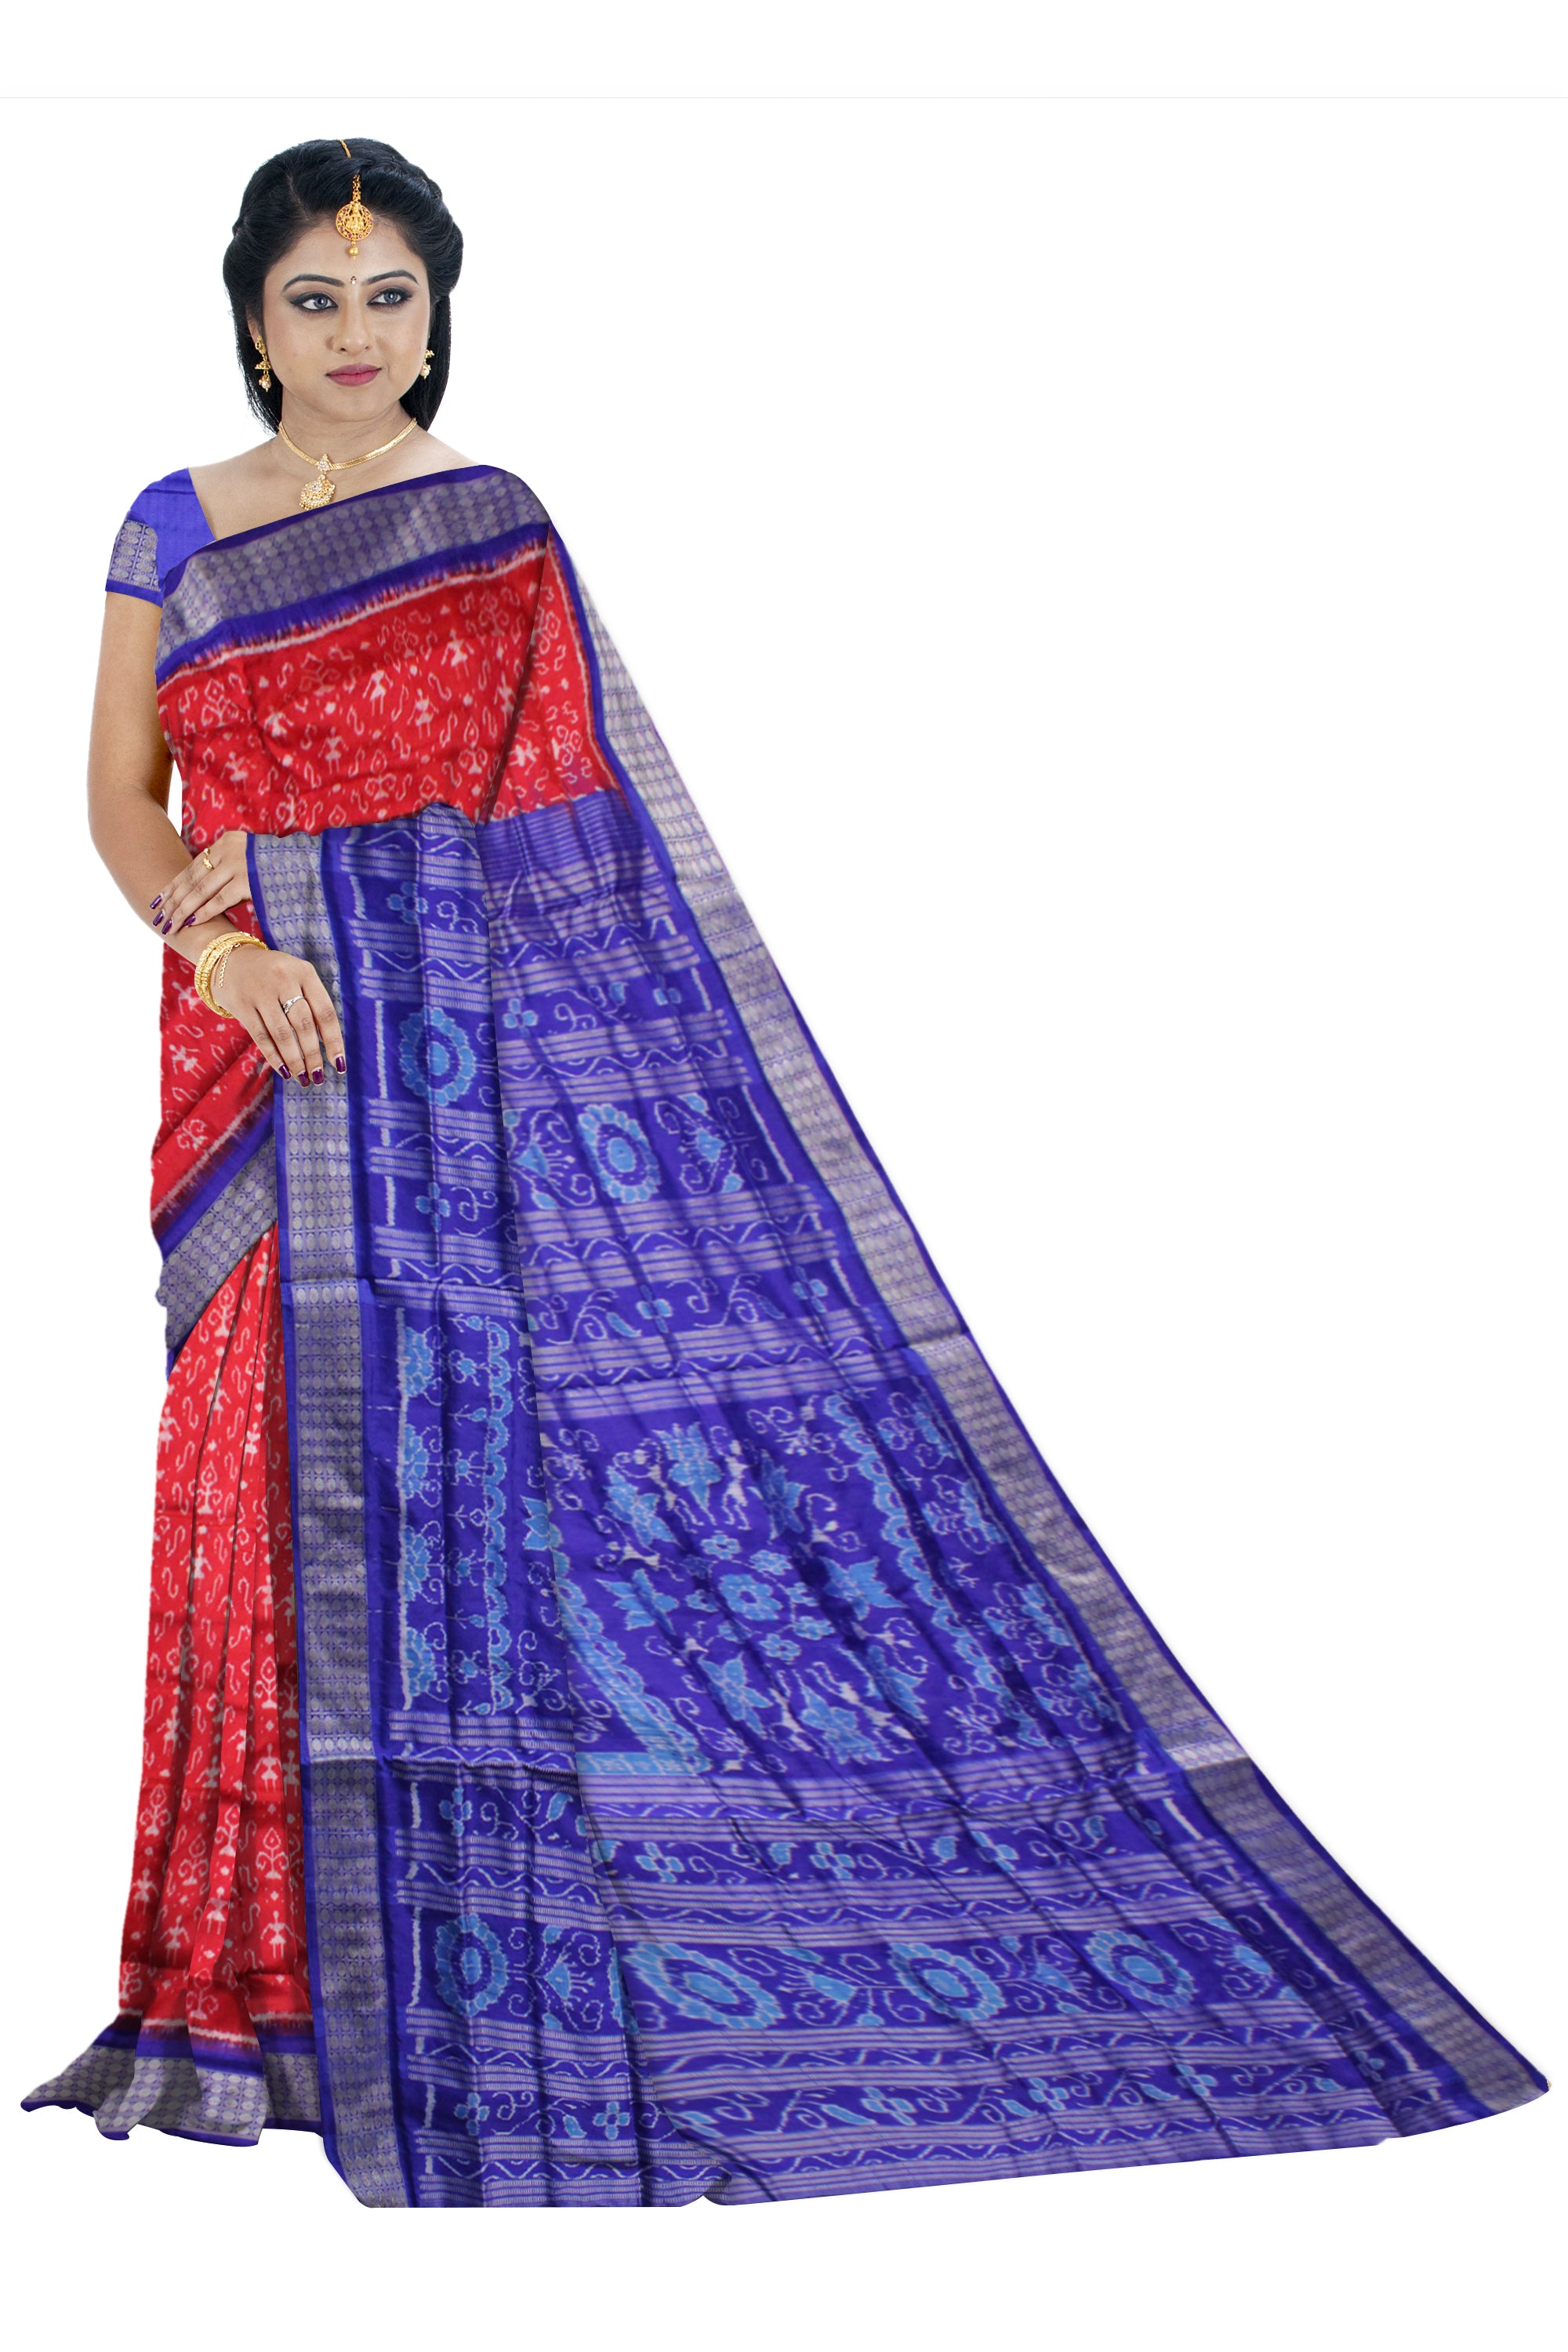 RED AND BLUE COLOR SMALL TERRACOTTA PATTERN PURE SILK SAREE,WITH MATCHING BLOUSE PIECE. - Koshali Arts & Crafts Enterprise